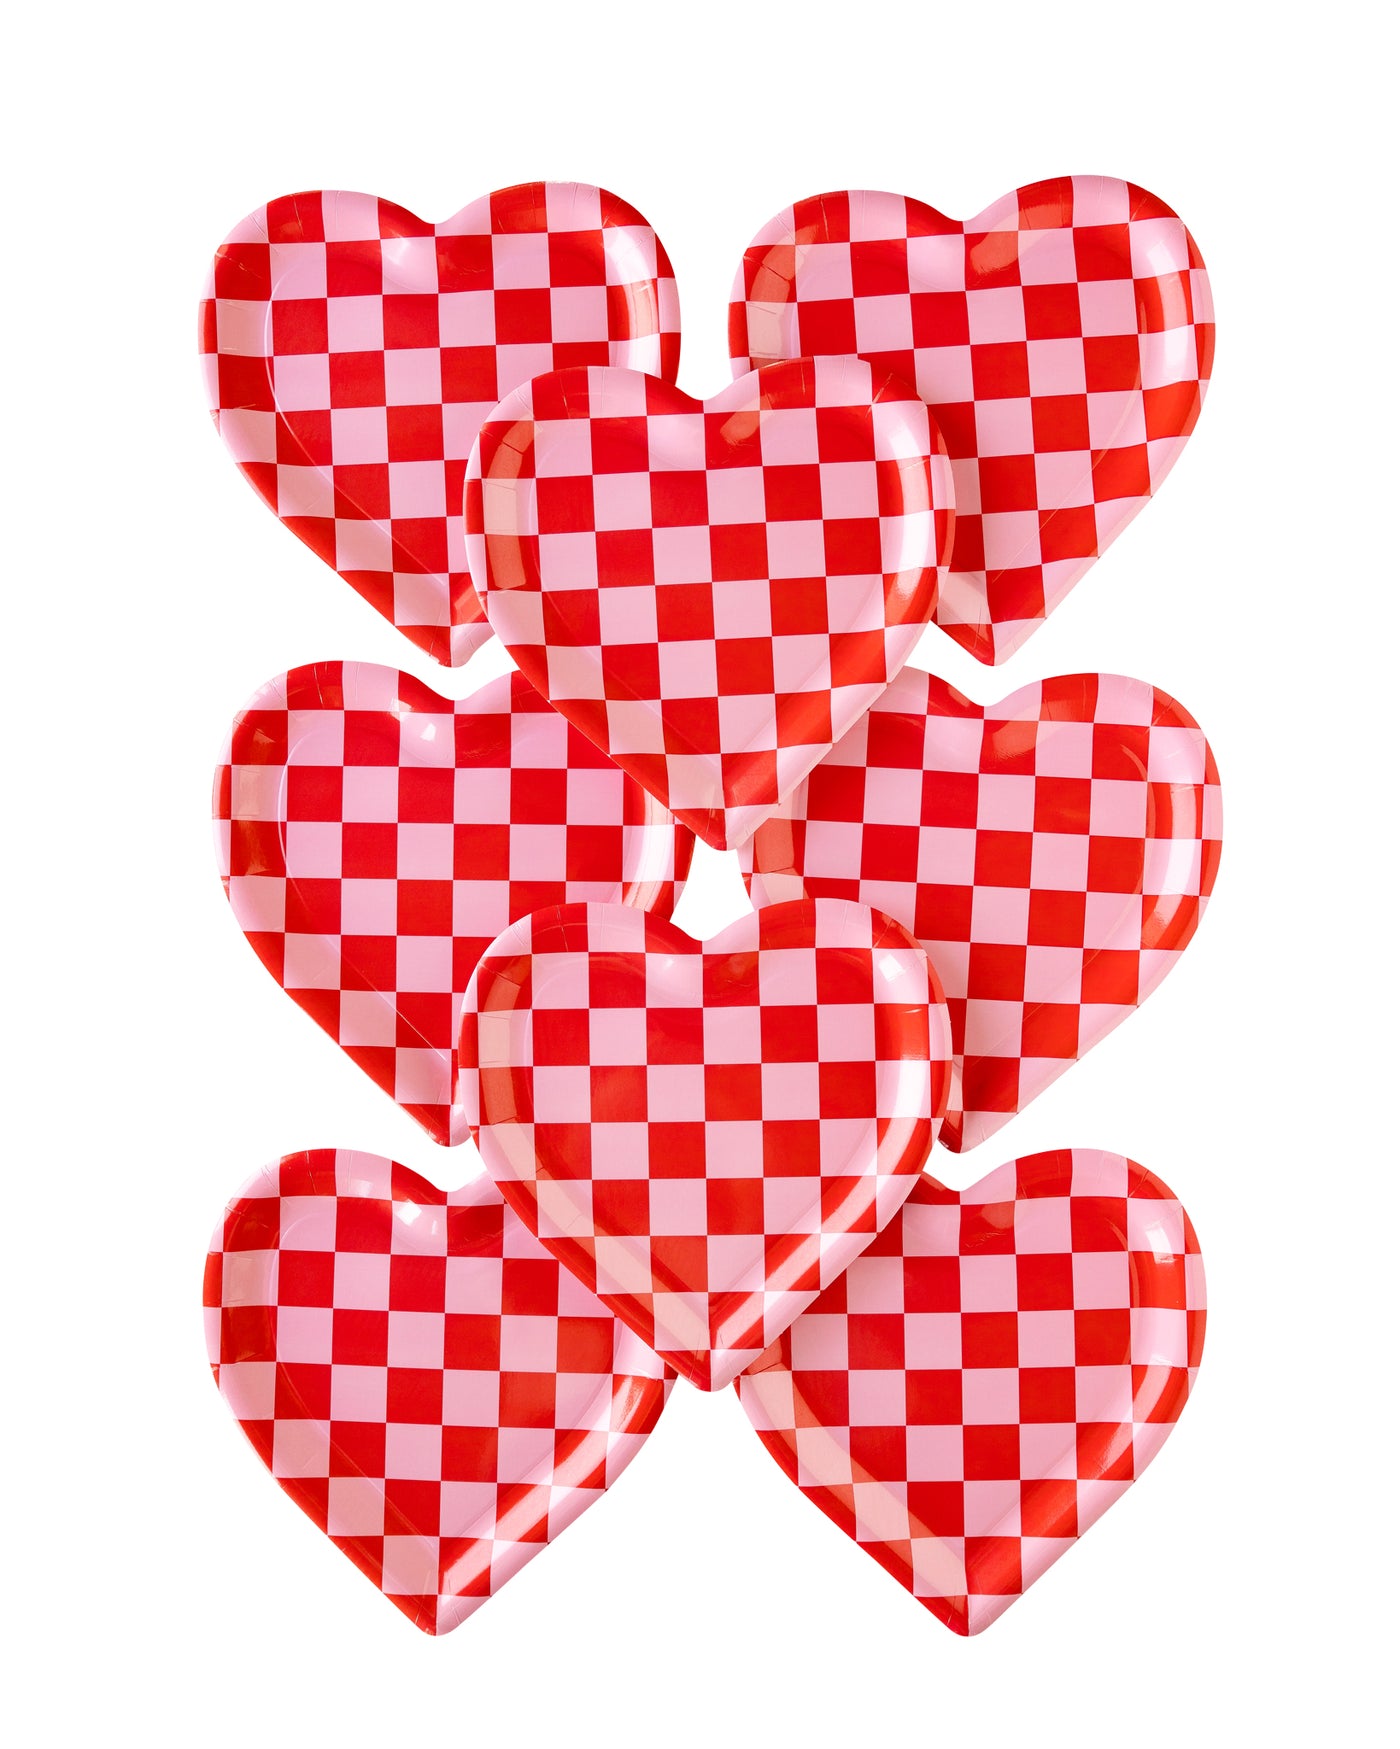 VAL1041 - Checkered Heart Shaped Paper Plate